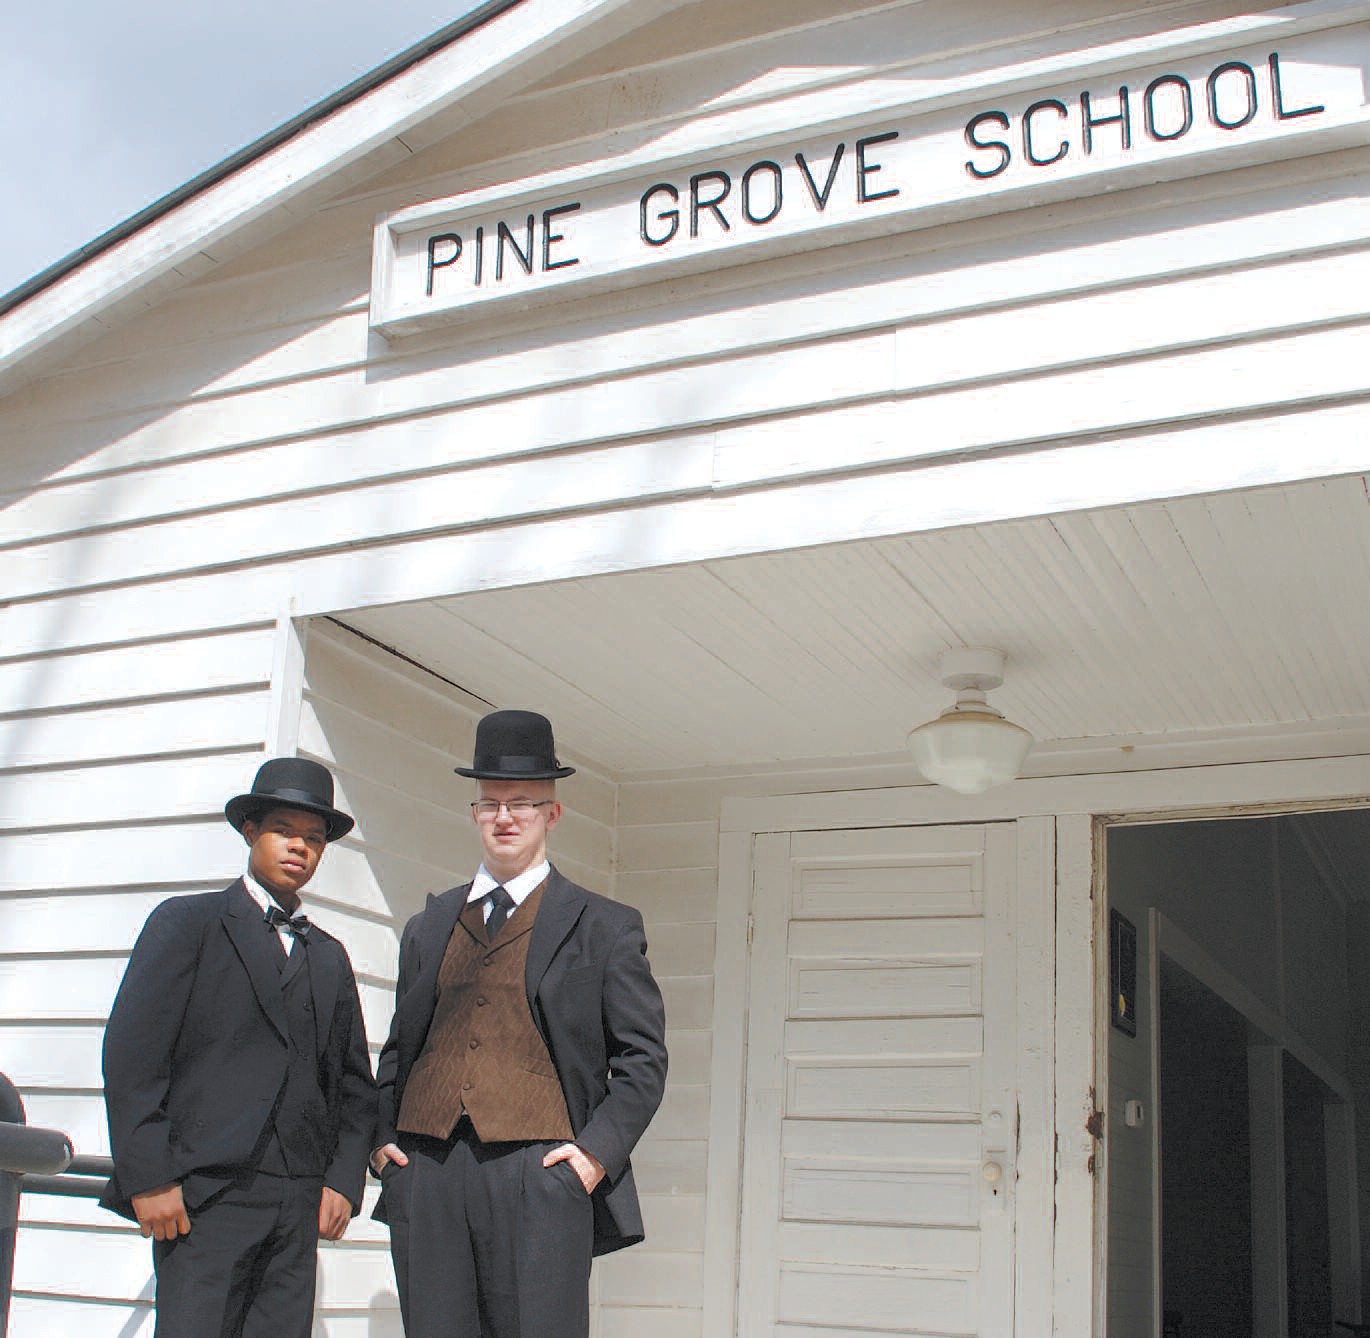 Pine Grove Rosenwald School holds Heritage Celebration in honor of Black History Month